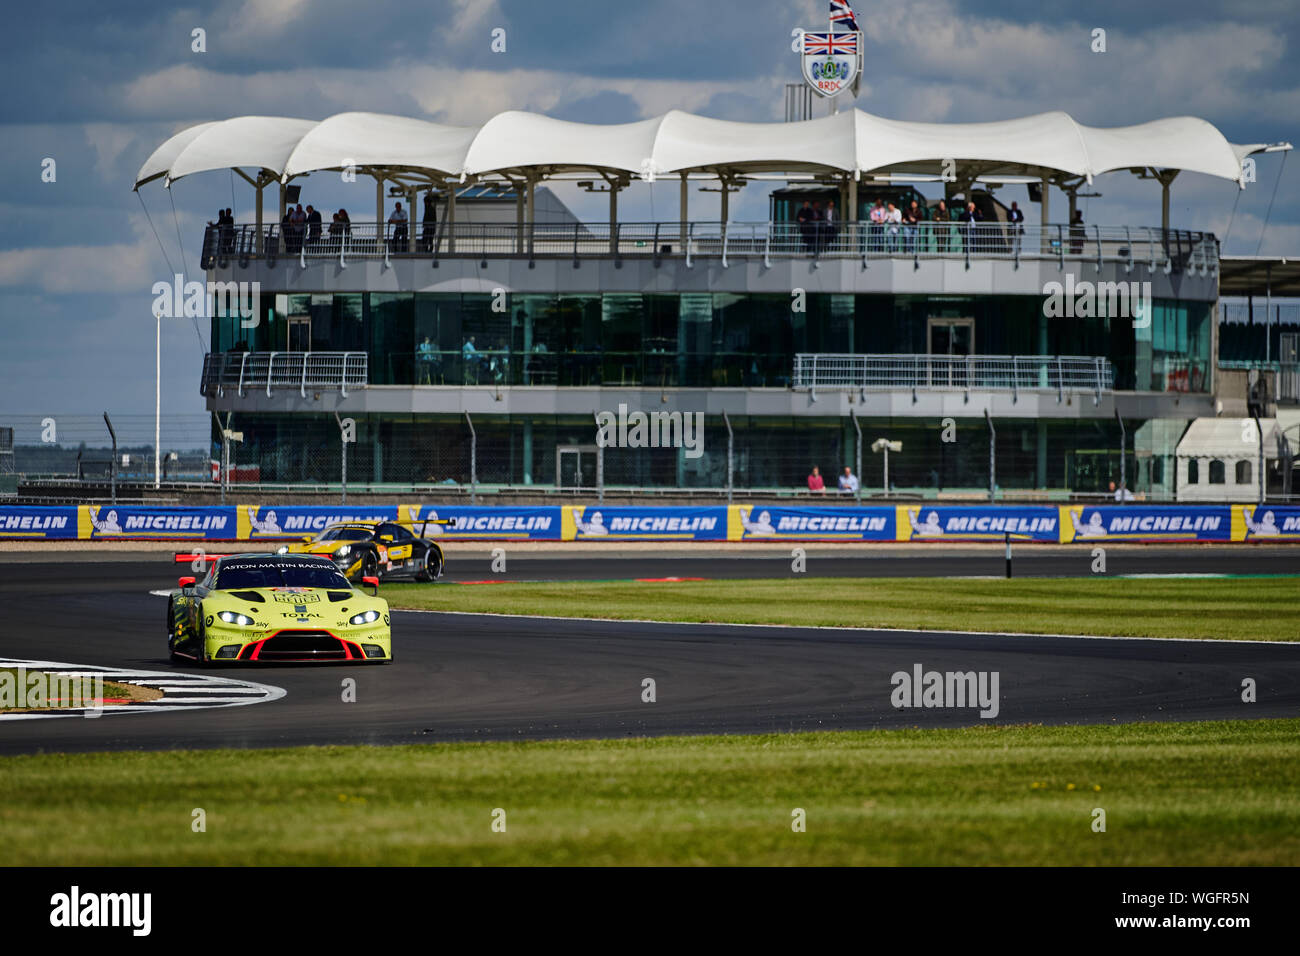 Towcester, Northamptonshire, UK. 1st September 2019. WEC Aston Martin Vantage AMR during the 2019 FIA 4 Hours of Silverstone World Endurance Championship at Silverstone Circuit. Photo by Gergo Toth / Alamy Live News Stock Photo